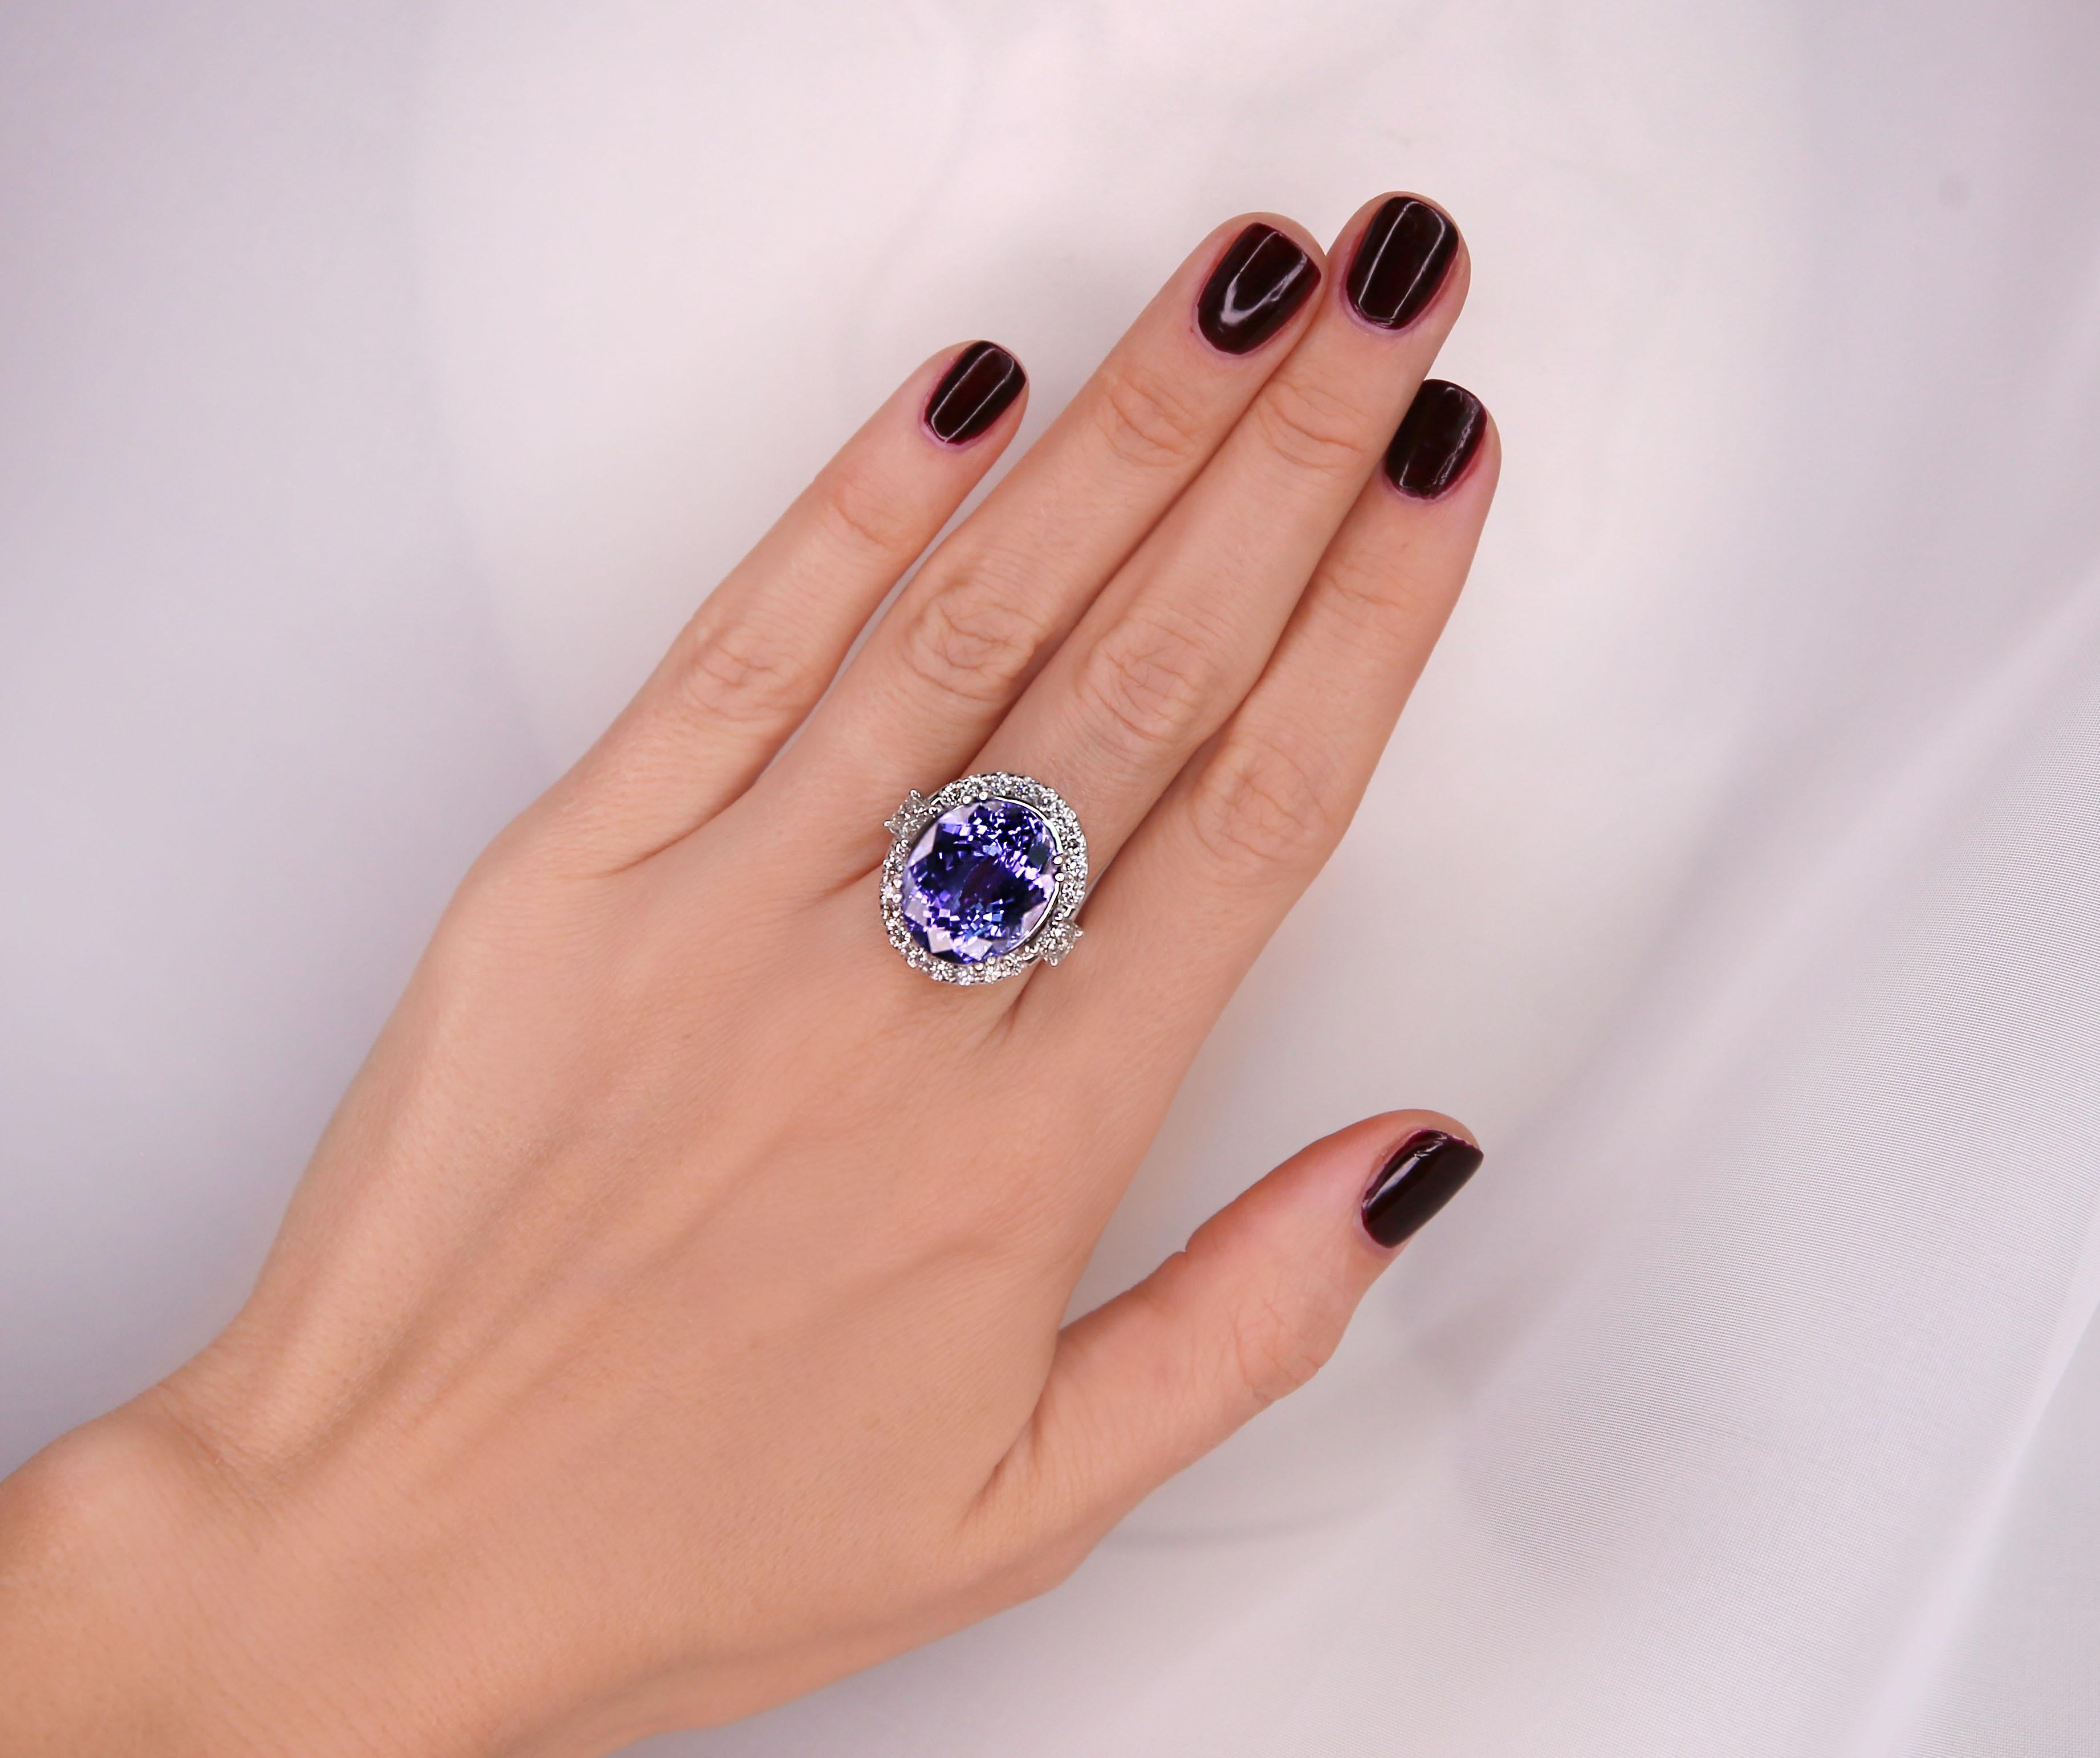 Item Type: Ring

Item Style: Cocktail

Material: 18K White Gold

Mainstone: Tanzanite

Stone Color: Blue

Stone Weight: 21.62 Carat

Stone Shape: Oval
Stone Quantity: 1

Stone Dimensions: 18.22x14.83 mm

Stone Creation Method: Natural

Stone